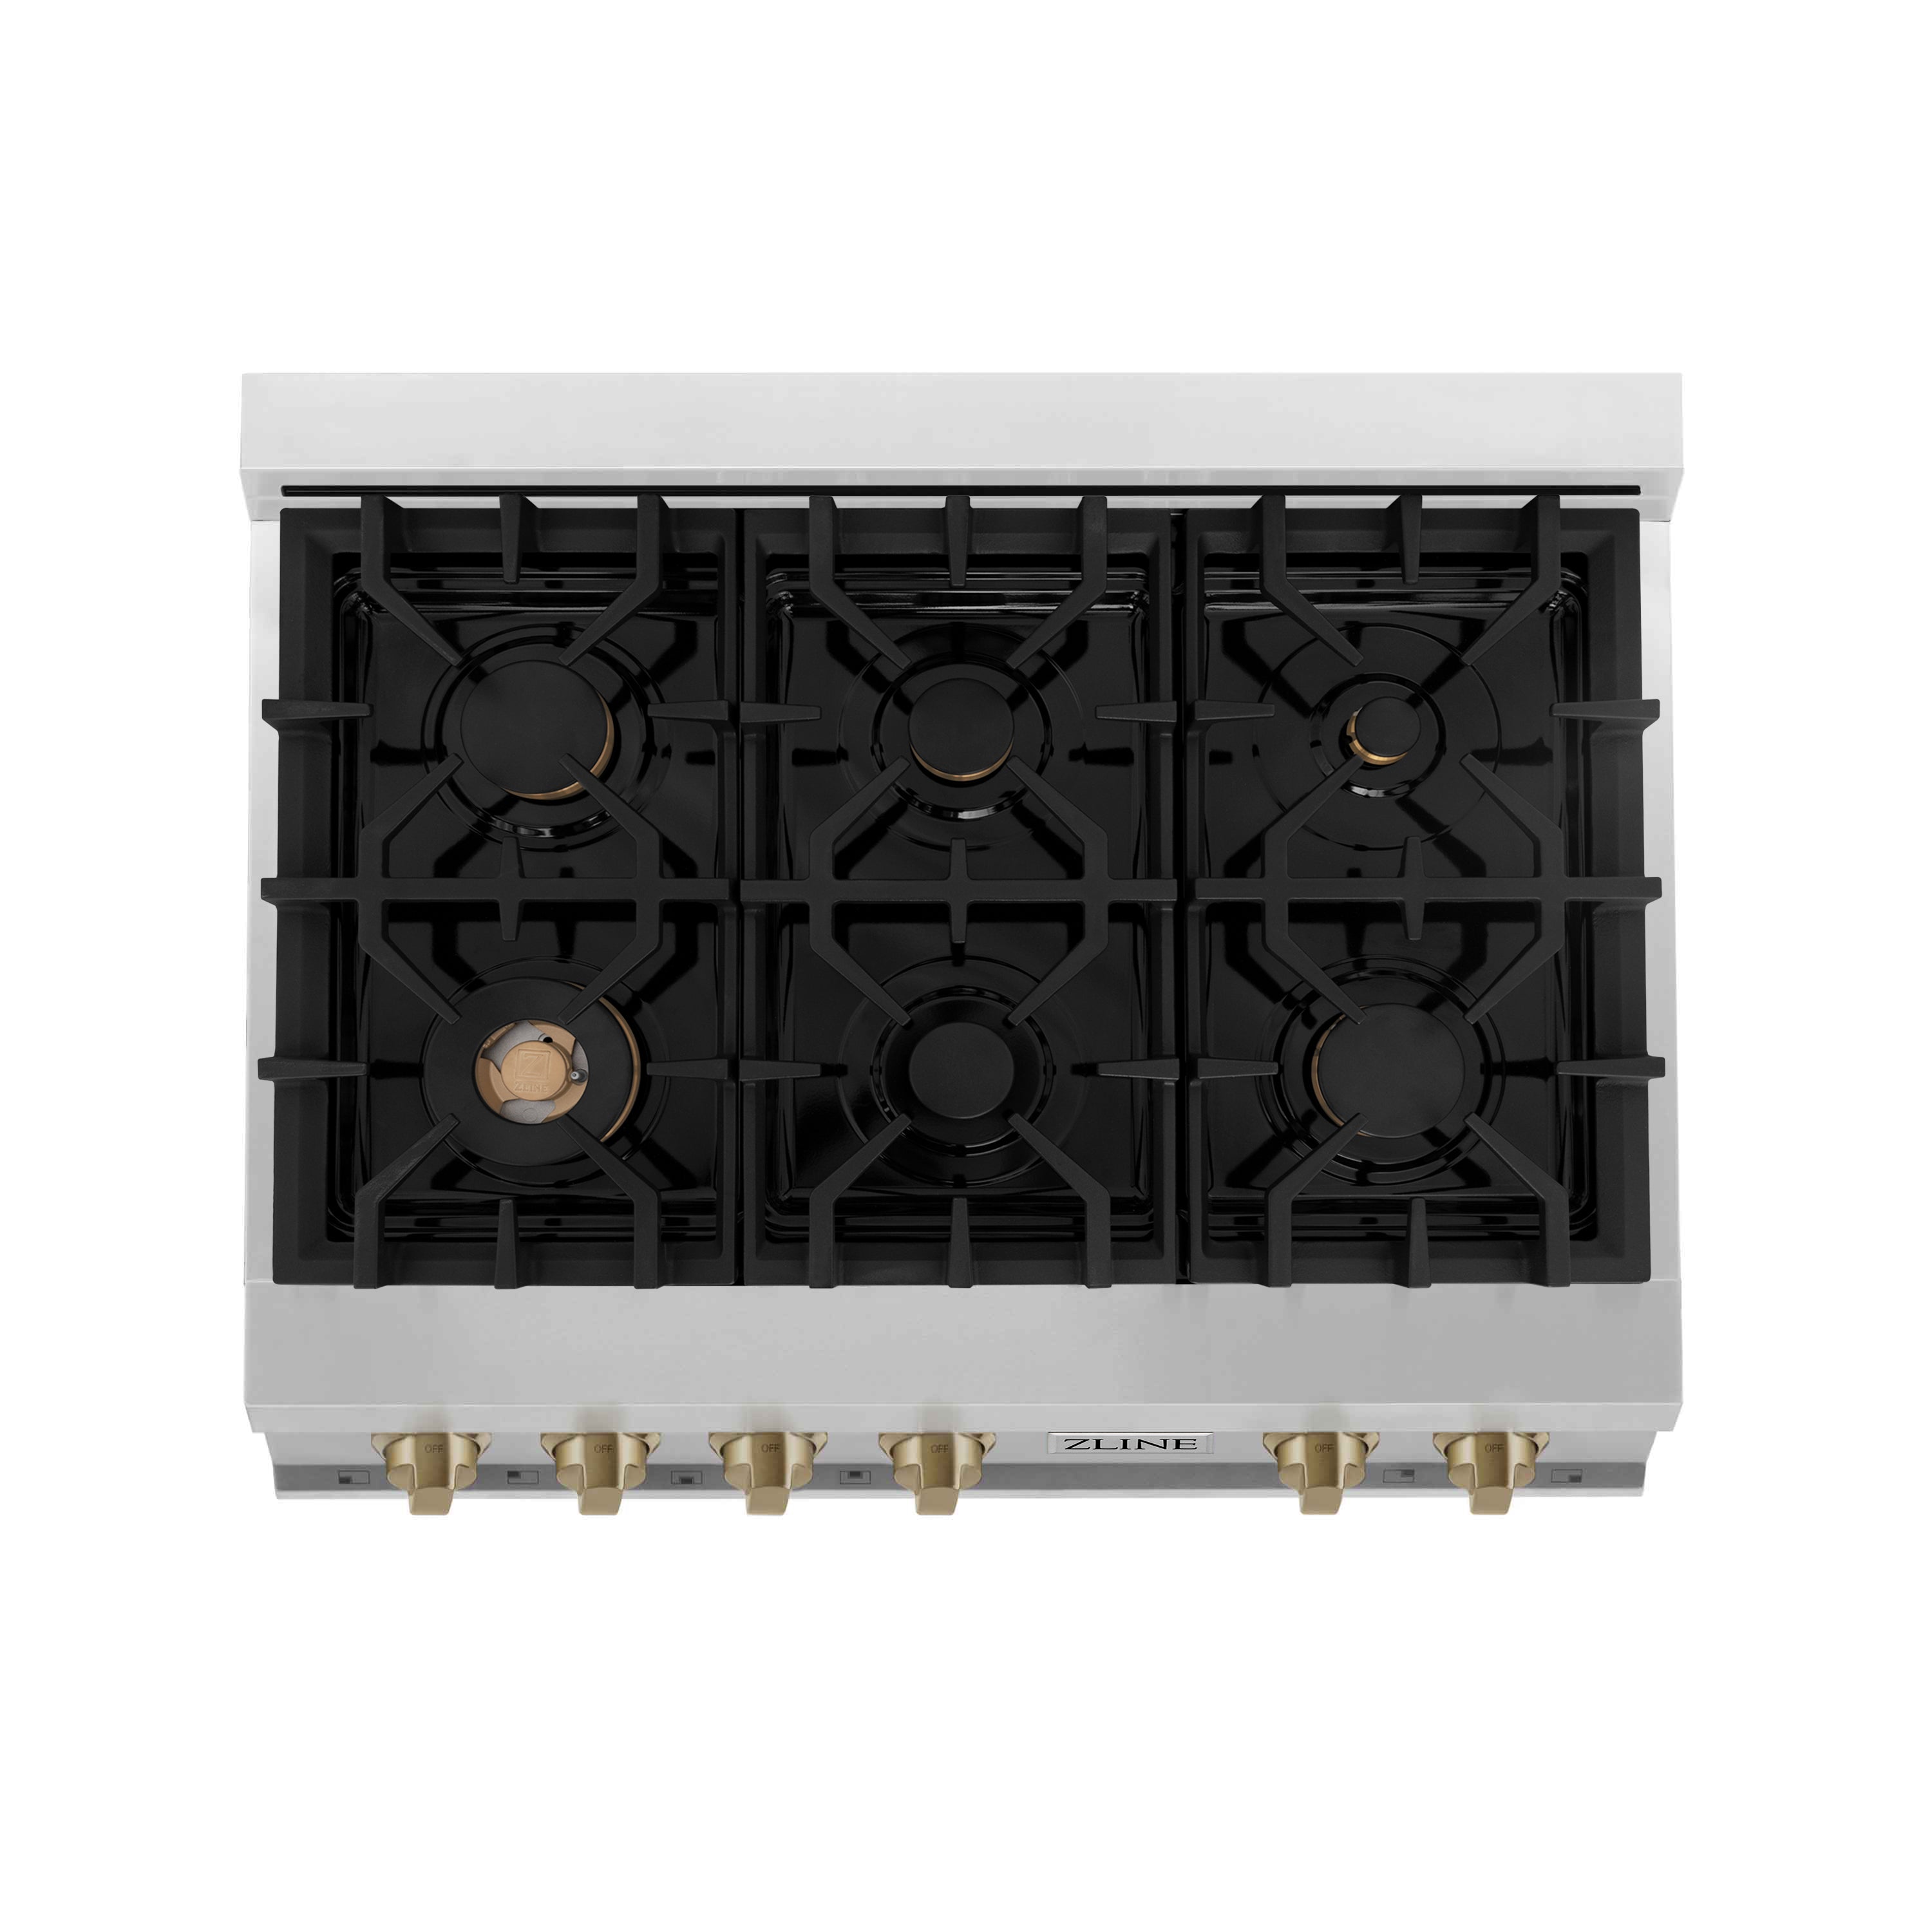 ZLINE Autograph Edition 36 in. 6-Burner Gas Rangetop in Stainless Steel with Champagne Bronze Accents and Black Porcelain Cooktop top down view showing 6-burner cooktop.